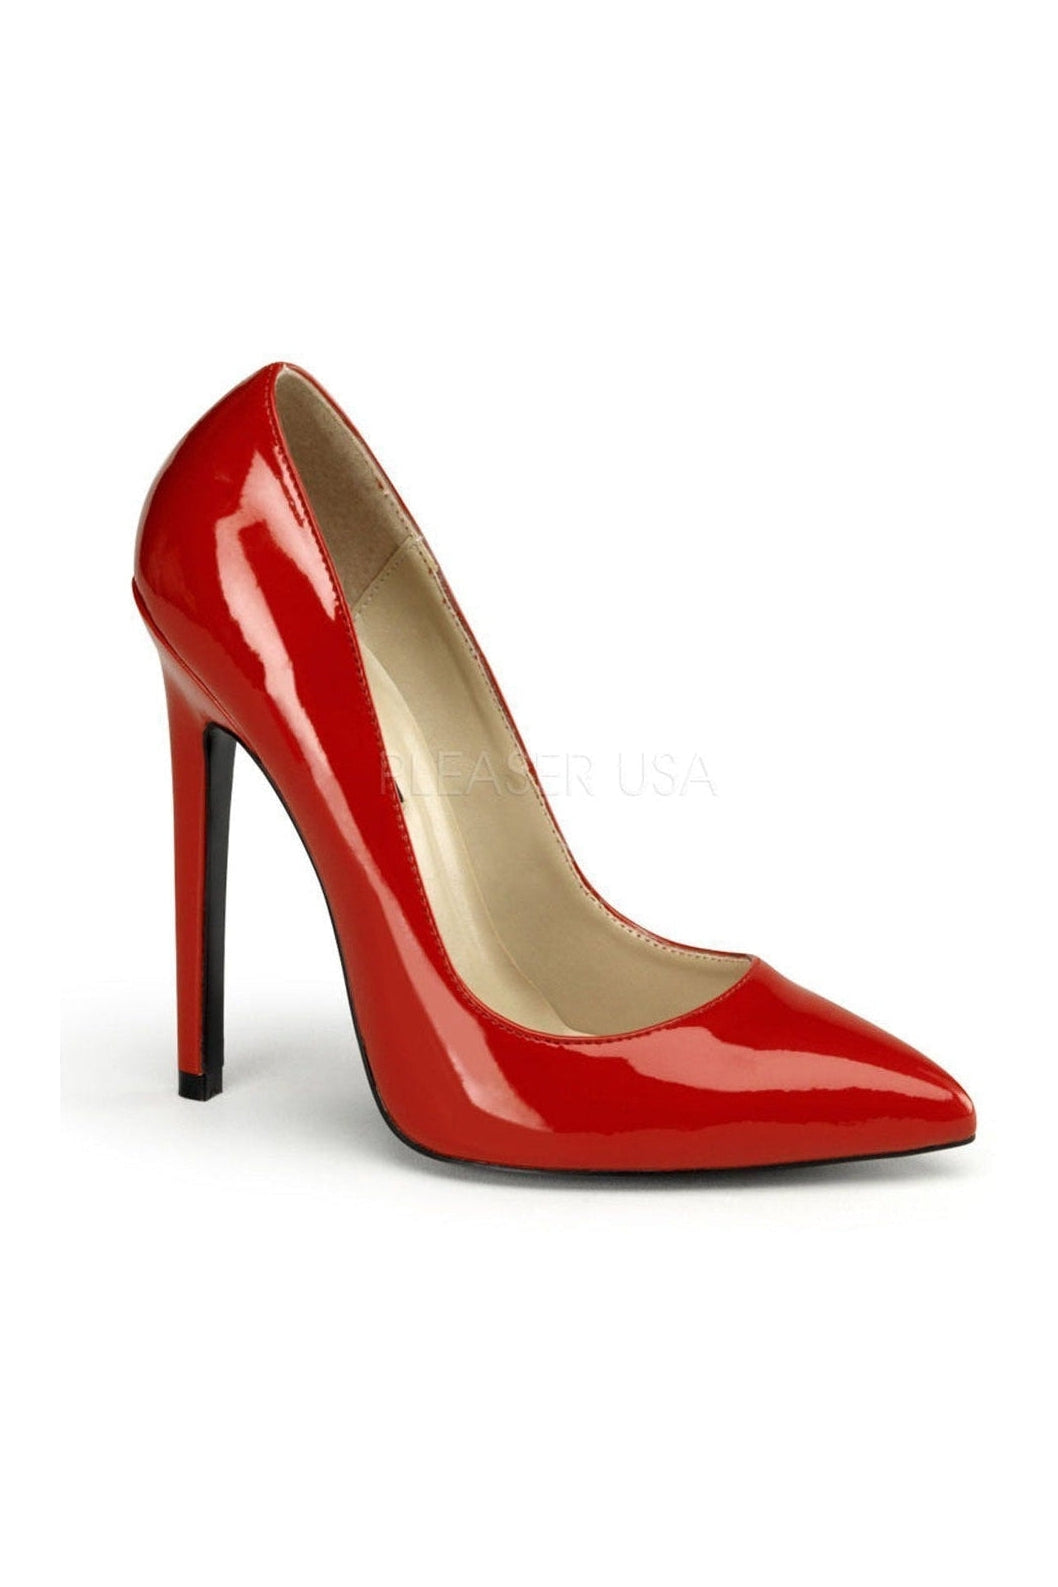 SEXY-20 Pump | Red Patent-Pleaser-Red-Pumps-SEXYSHOES.COM